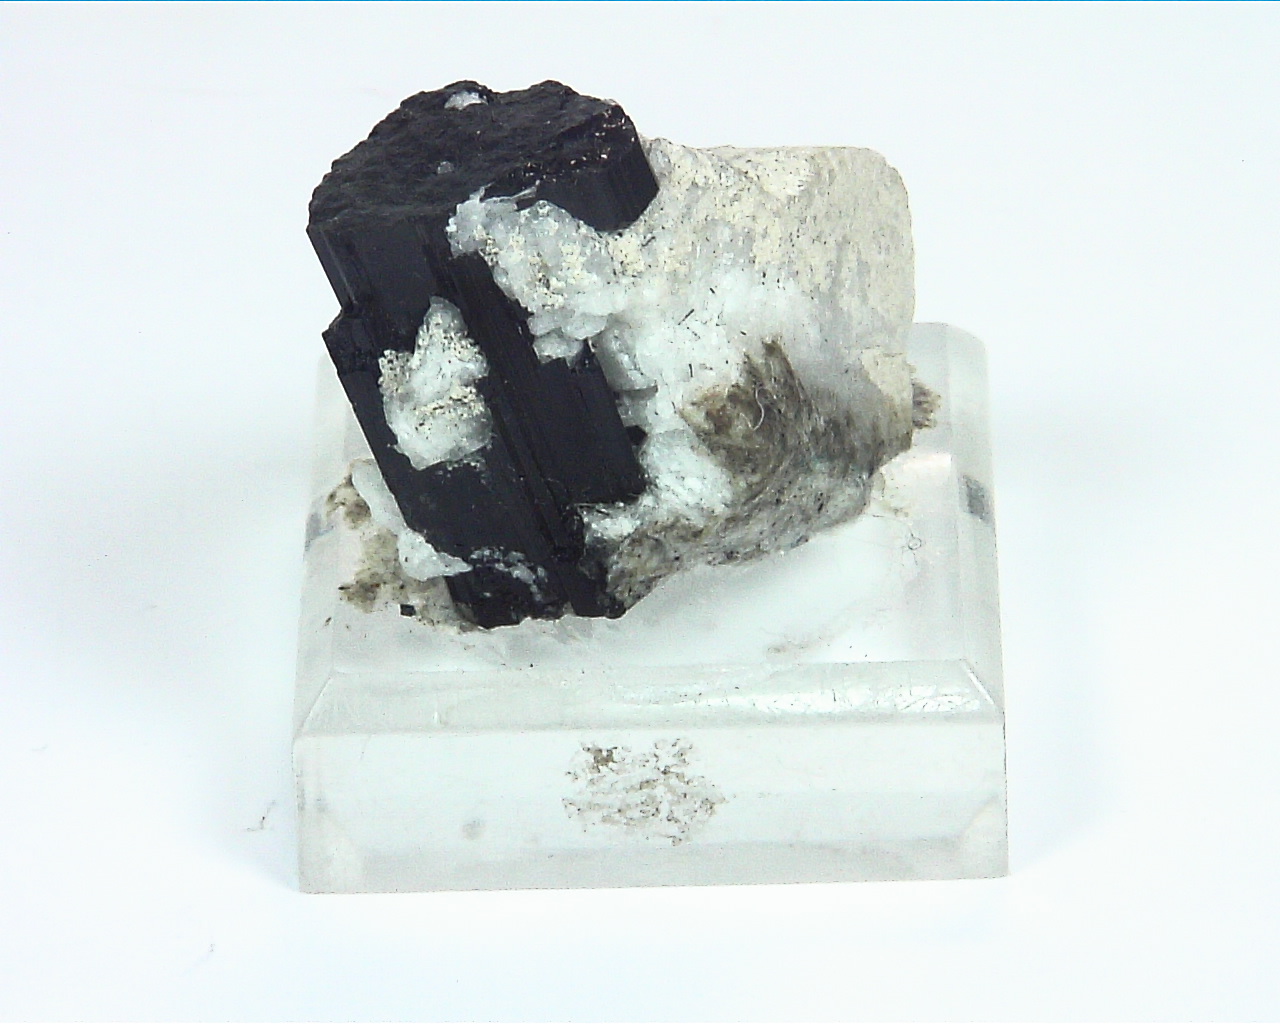 Quarts Crystal with Black Tourmaline Crystals,MS,786 4